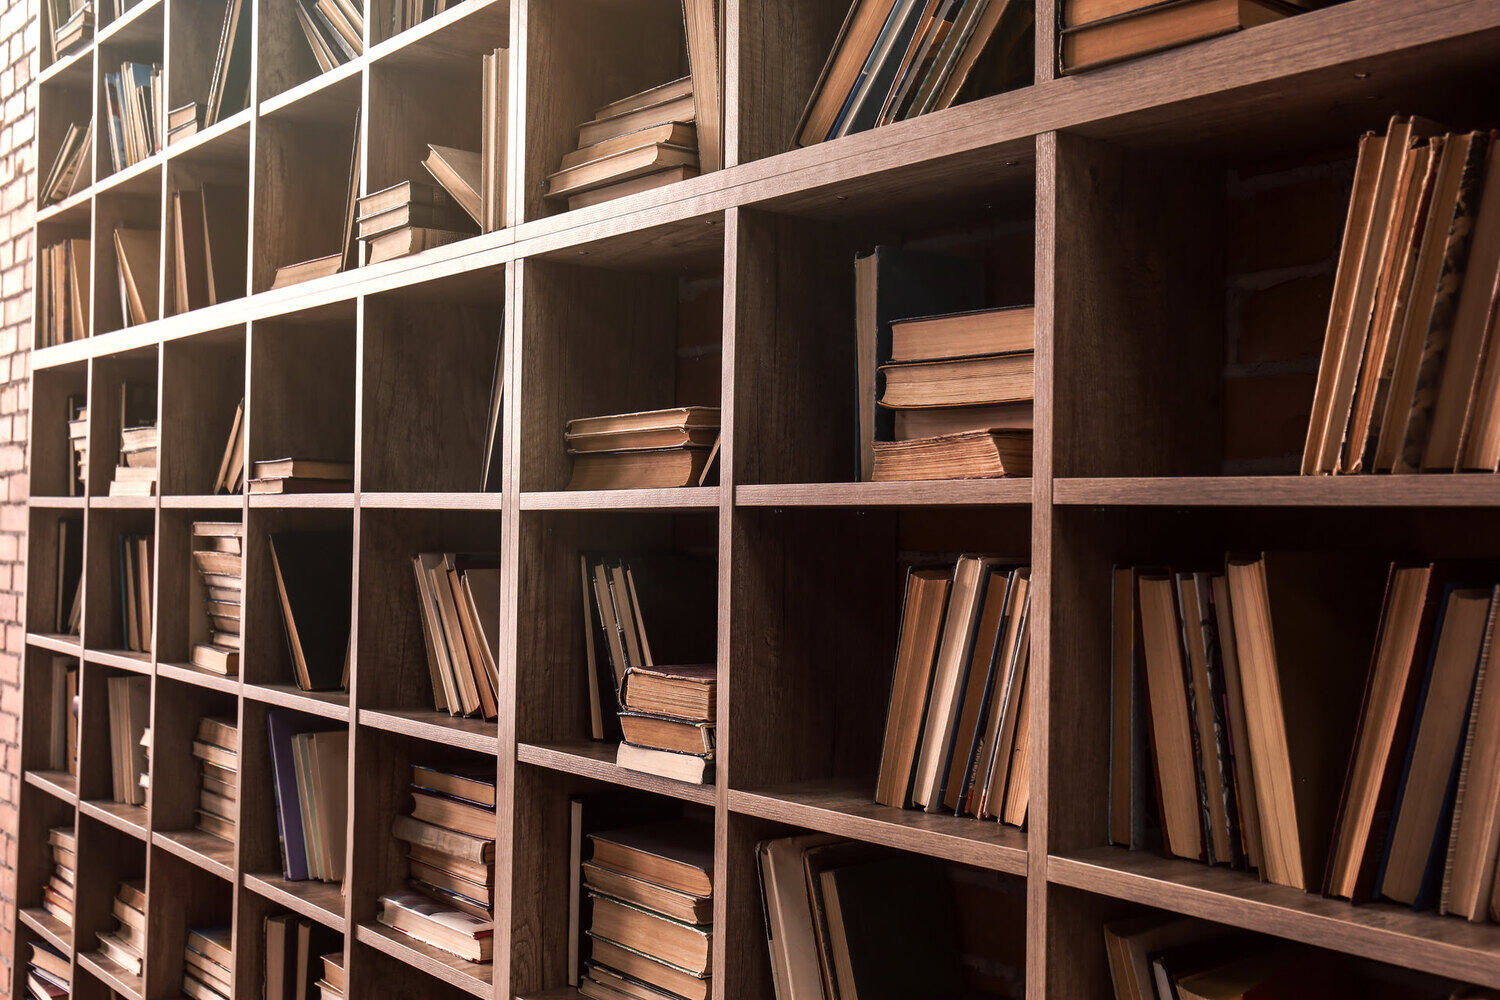 How To Store Books In Storage Unit